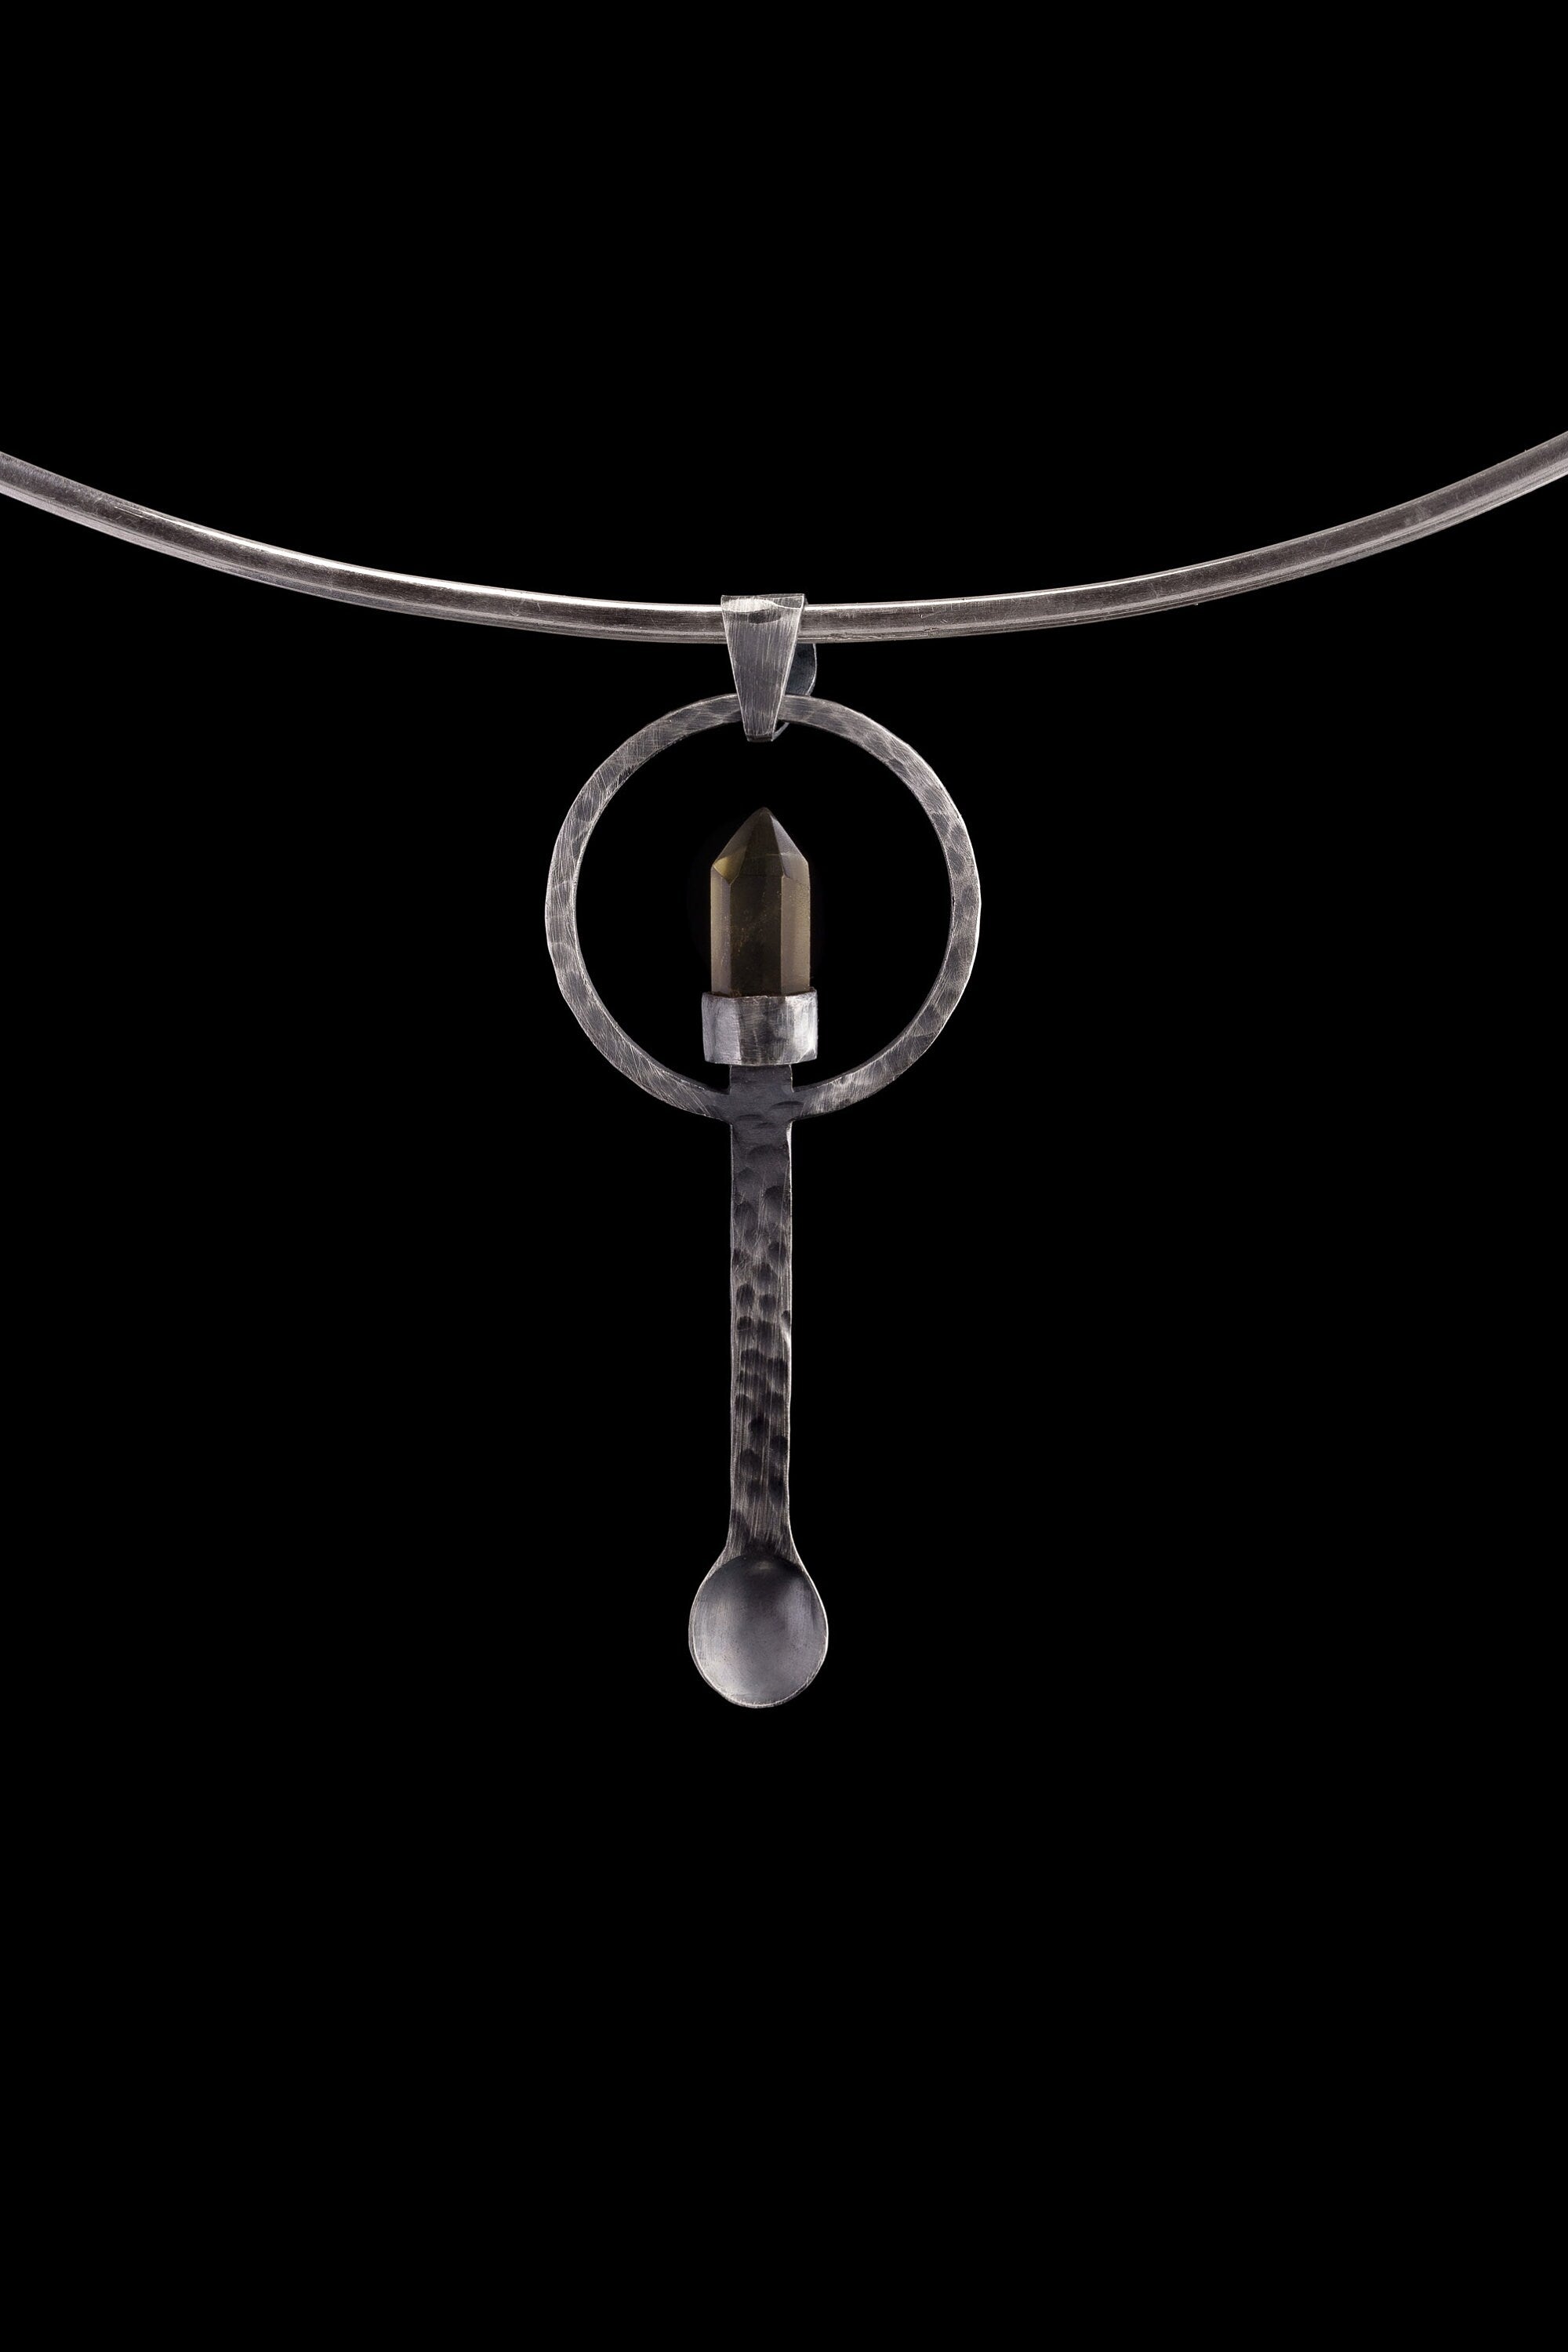 Cut Citrine Generator - Spice / Ceremonial Spoon - 925 Cast Silver - Oxidised Hammer Textured - Crystal Pendant Necklace